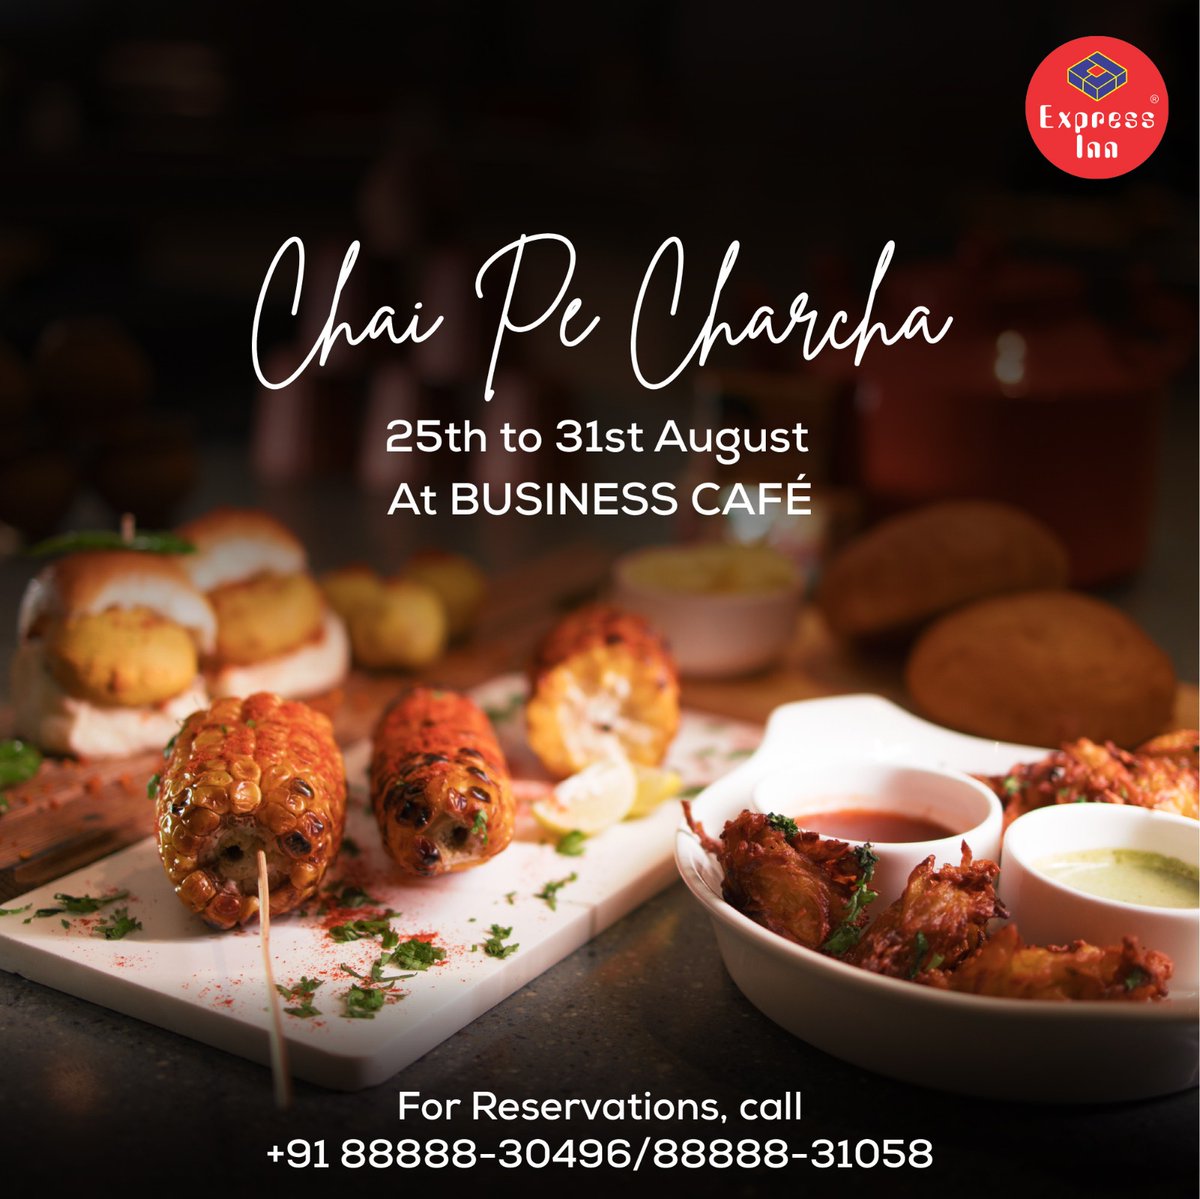 Embrace the monsoons with Chai PeCharcha - The Chai Pakoda Festival starting from 25th till 31st August. Witness this at The Business Café from 4 pm to 6:30 pm.
For table reservation - Call +91 88888-30496 / +91 88888- 31058
#expressinnnashik #chai #pakoda #rainyday #businesscafe